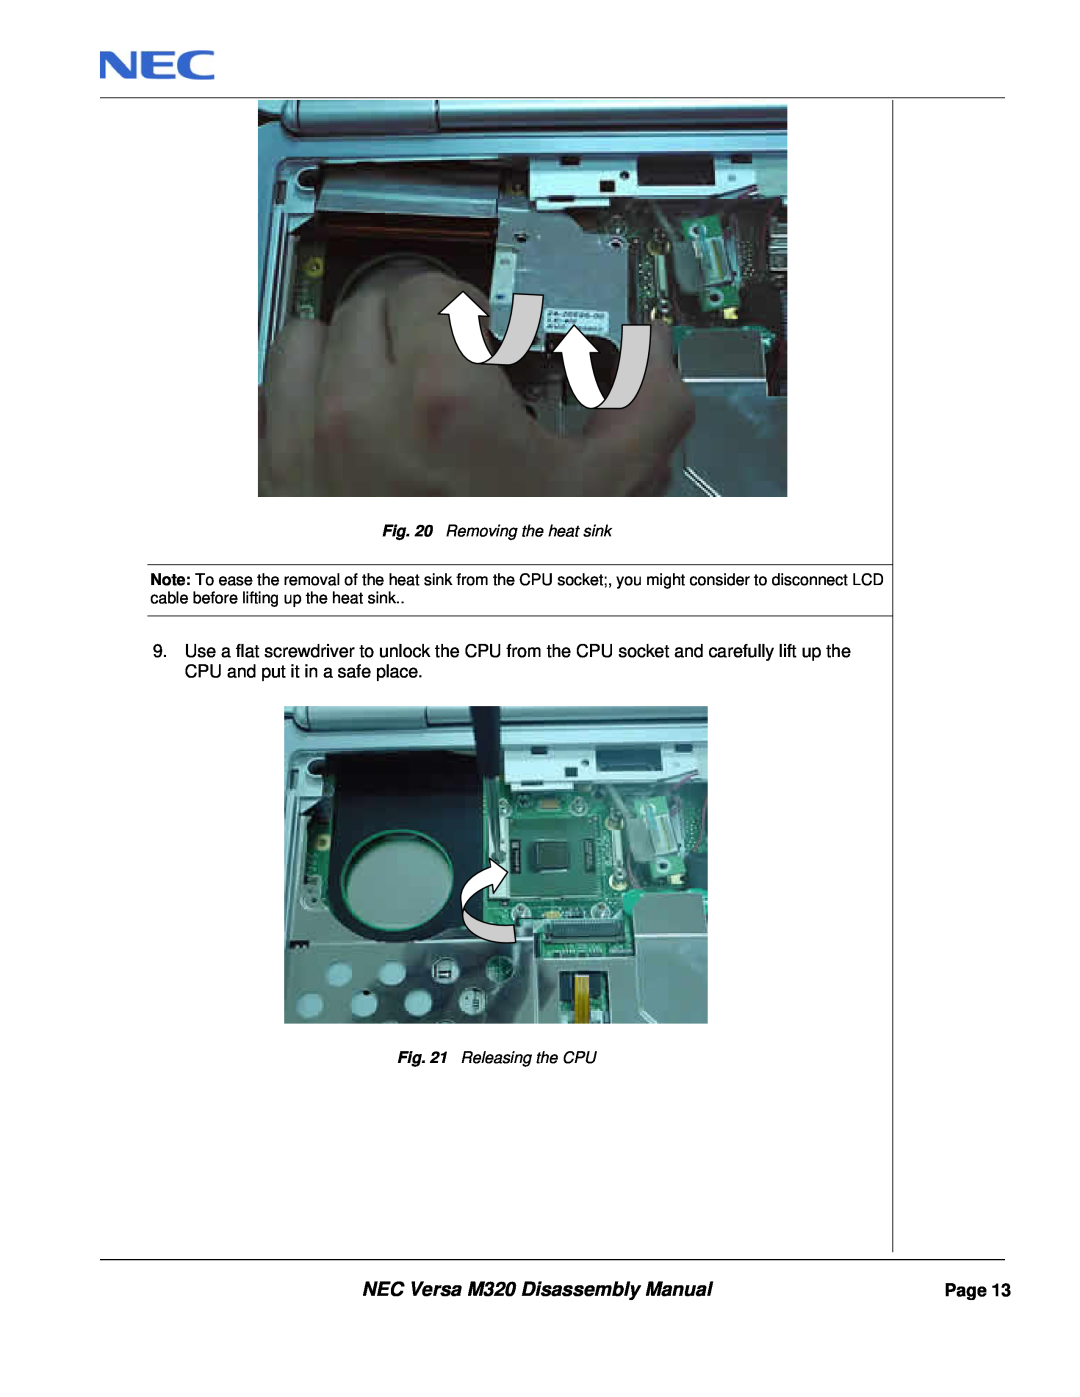 NEC manual NEC Versa M320 Disassembly Manual, Removing the heat sink, Releasing the CPU, Page 